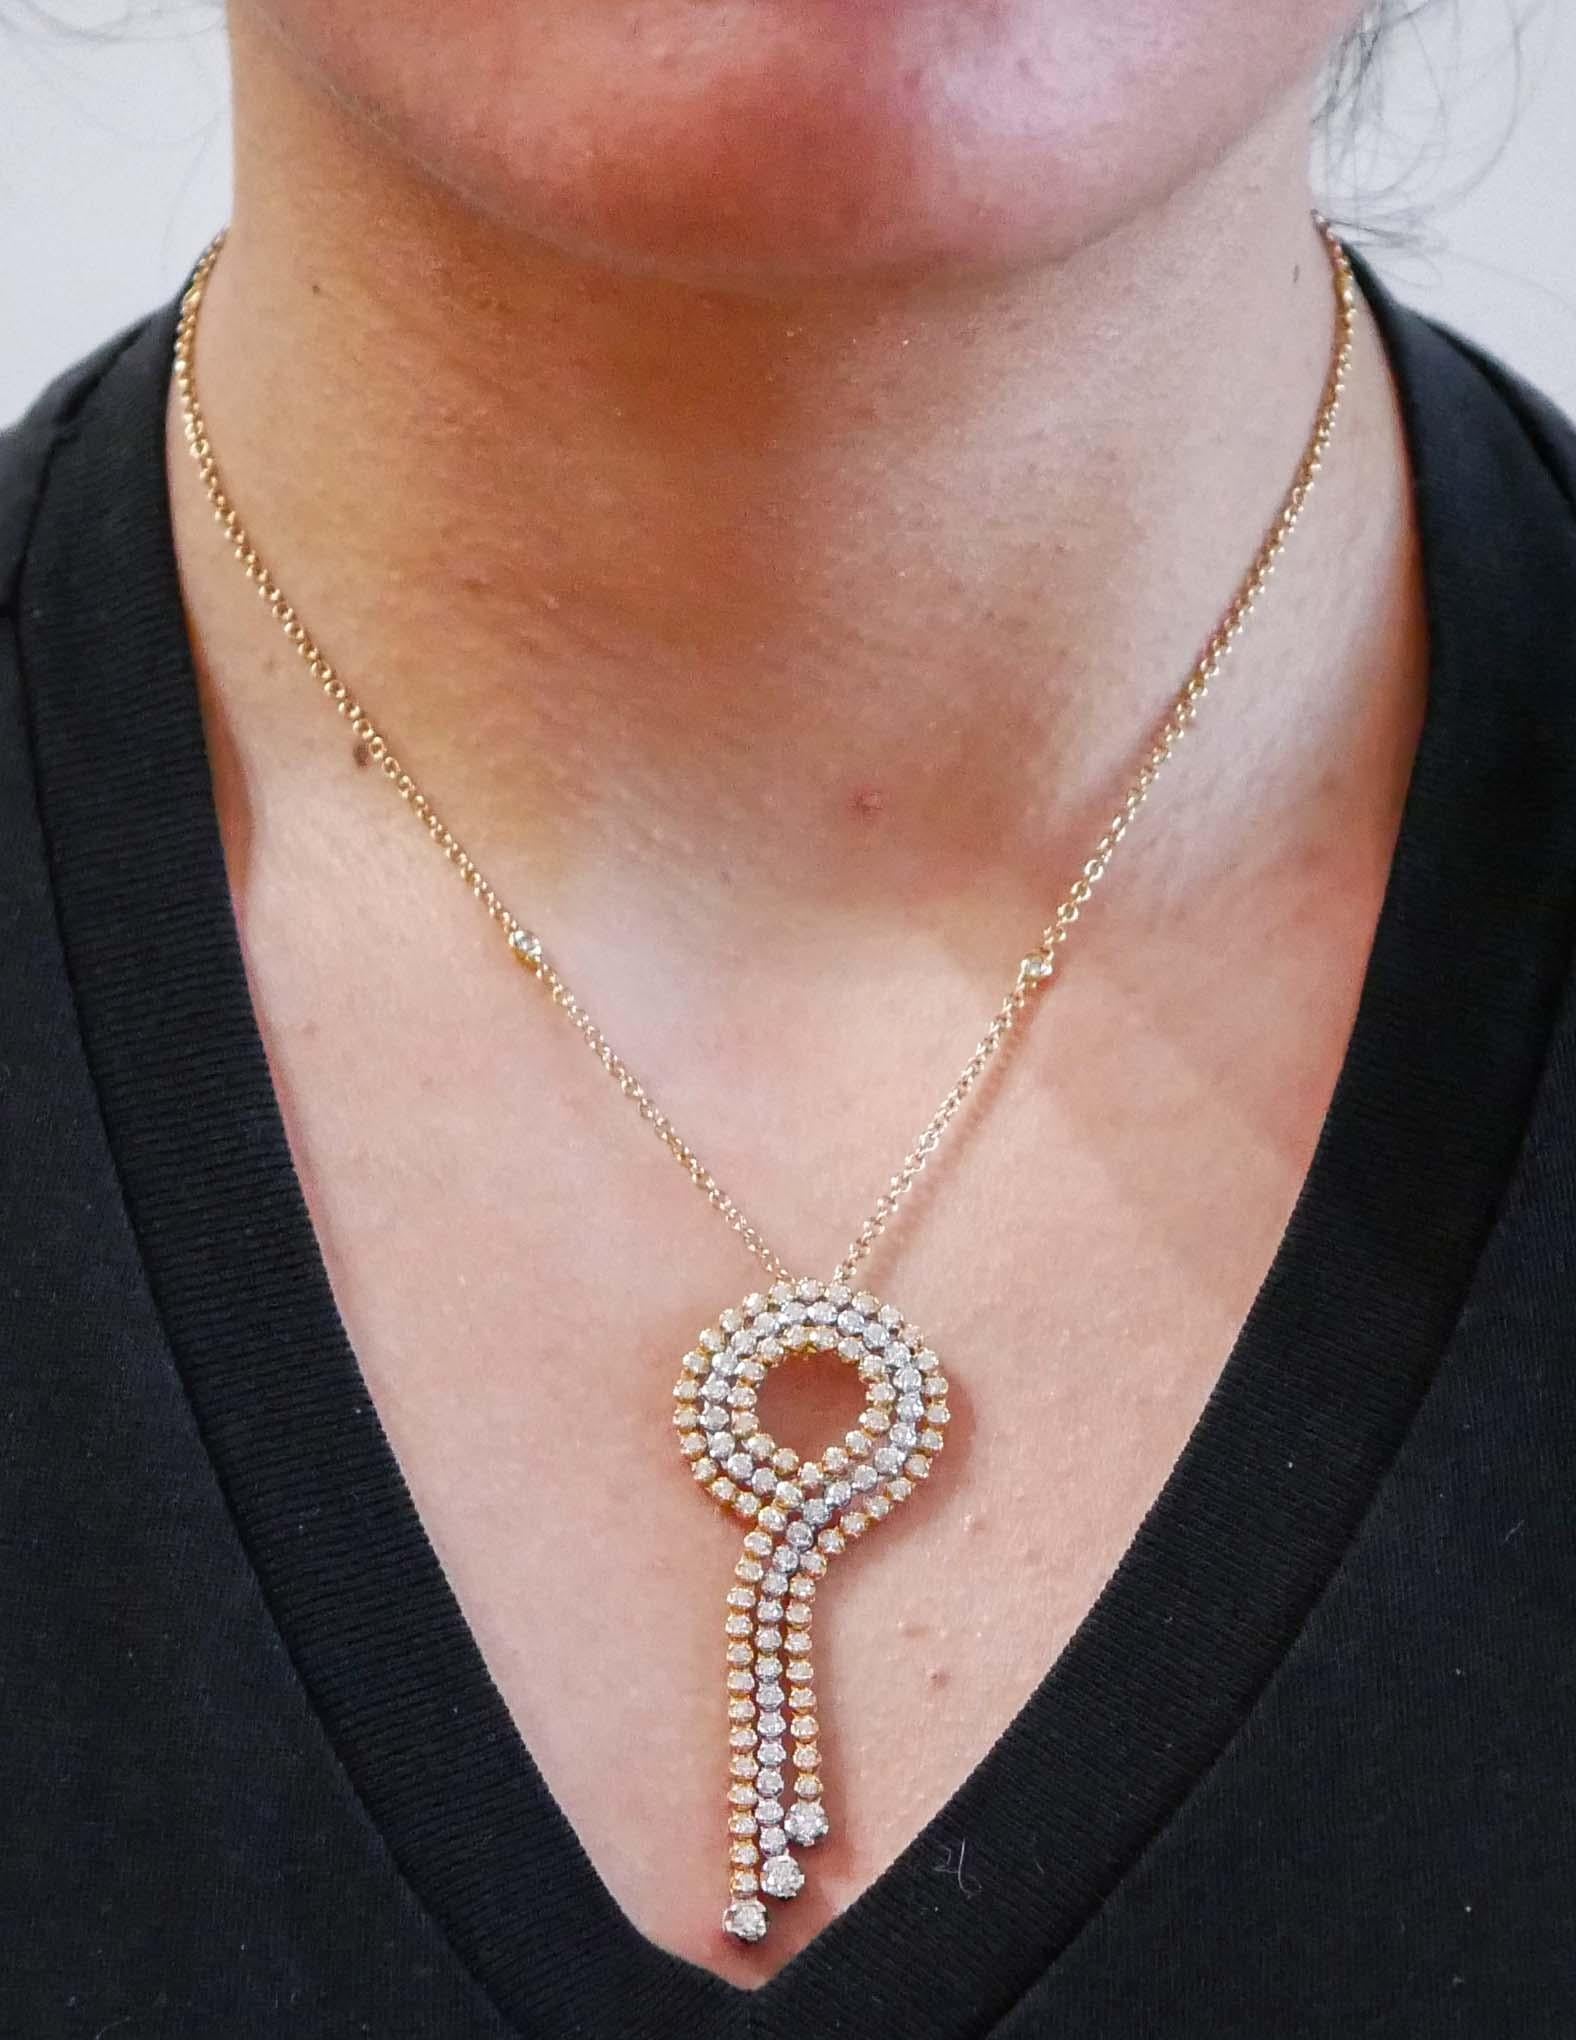 Women's Diamonds, 18 Karat Rose Gold and White Gold Pendant Necklace. For Sale